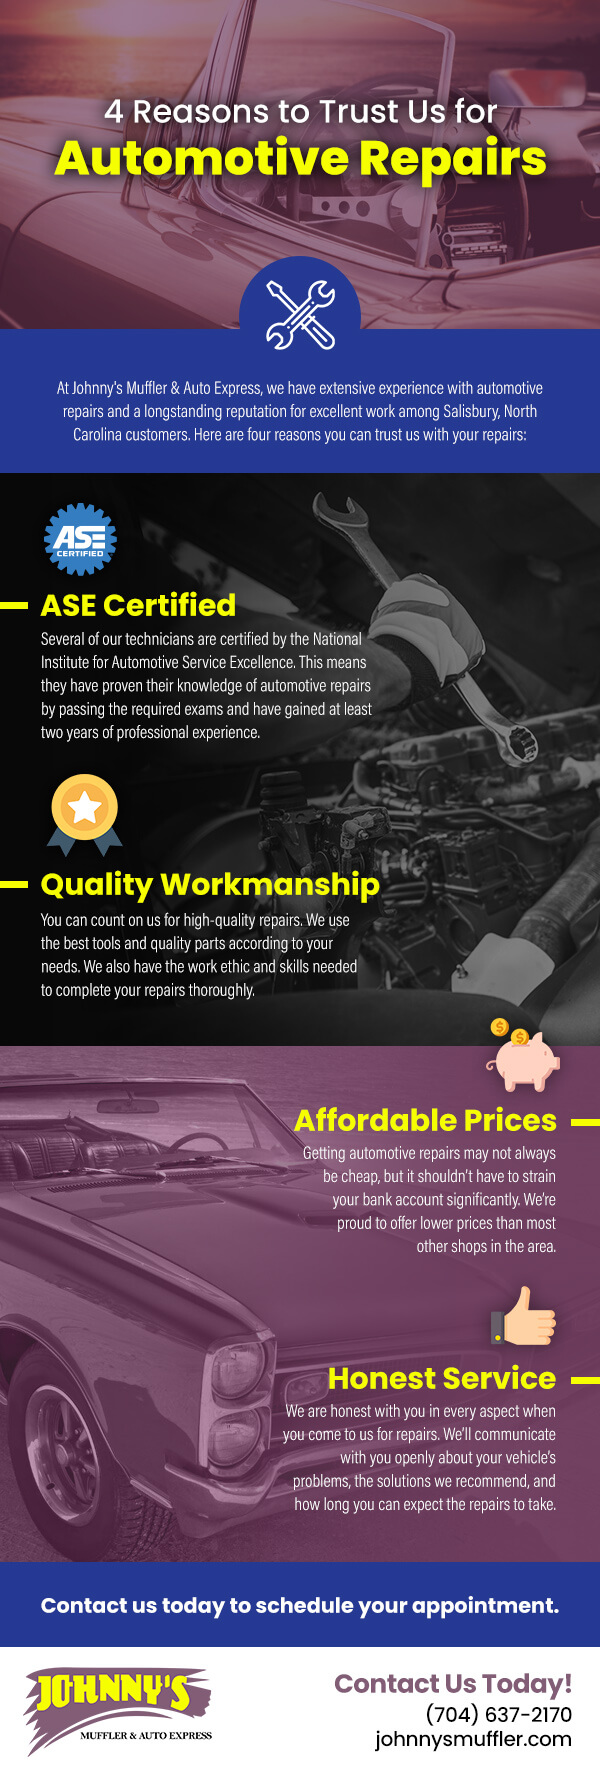 4 Reasons to Trust Us for Automotive Repairs